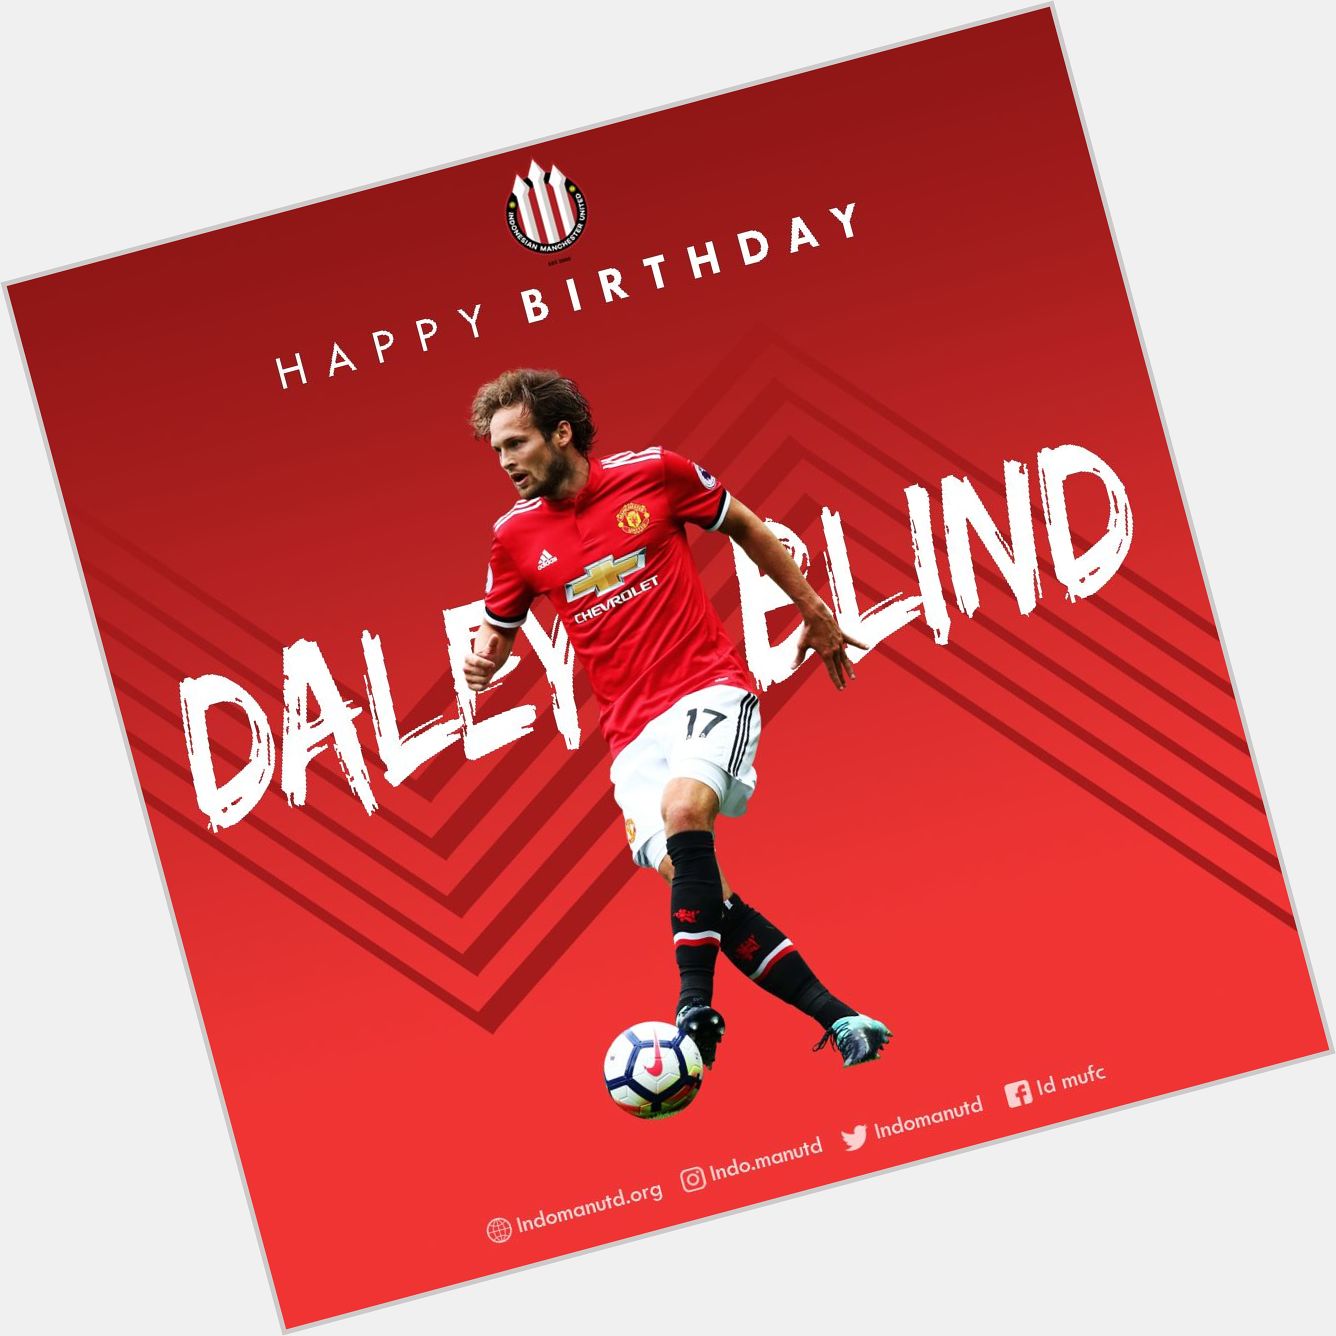 Happy Birthday, Daley Blind!!! All the best   